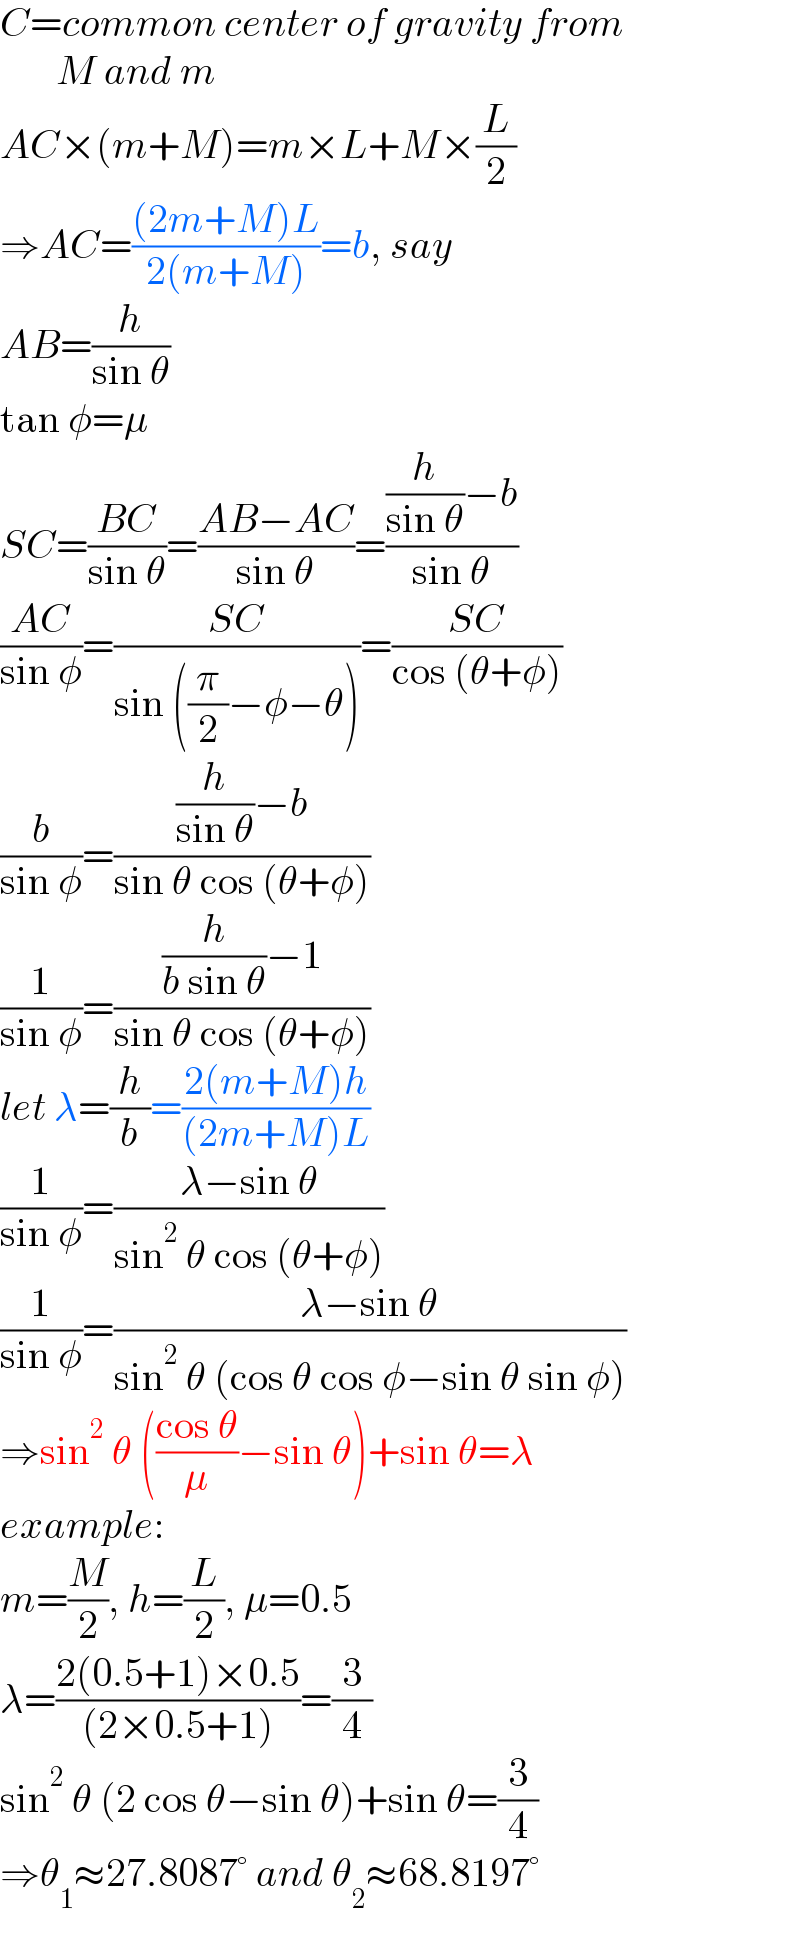 C=common center of gravity from         M and m  AC×(m+M)=m×L+M×(L/2)  ⇒AC=(((2m+M)L)/(2(m+M)))=b, say  AB=(h/(sin θ))  tan φ=μ  SC=((BC)/(sin θ))=((AB−AC)/(sin θ))=(((h/(sin θ))−b)/(sin θ))  ((AC)/(sin φ))=((SC)/(sin ((π/2)−φ−θ)))=((SC)/(cos (θ+φ)))  (b/(sin φ))=(((h/(sin θ))−b)/(sin θ cos (θ+φ)))  (1/(sin φ))=(((h/(b sin θ))−1)/(sin θ cos (θ+φ)))  let λ=(h/b)=((2(m+M)h)/((2m+M)L))  (1/(sin φ))=((λ−sin θ)/(sin^2  θ cos (θ+φ)))  (1/(sin φ))=((λ−sin θ)/(sin^2  θ (cos θ cos φ−sin θ sin φ)))  ⇒sin^2  θ (((cos θ)/μ)−sin θ)+sin θ=λ  example:  m=(M/2), h=(L/2), μ=0.5  λ=((2(0.5+1)×0.5)/((2×0.5+1)))=(3/4)  sin^2  θ (2 cos θ−sin θ)+sin θ=(3/4)  ⇒θ_1 ≈27.8087° and θ_2 ≈68.8197°  